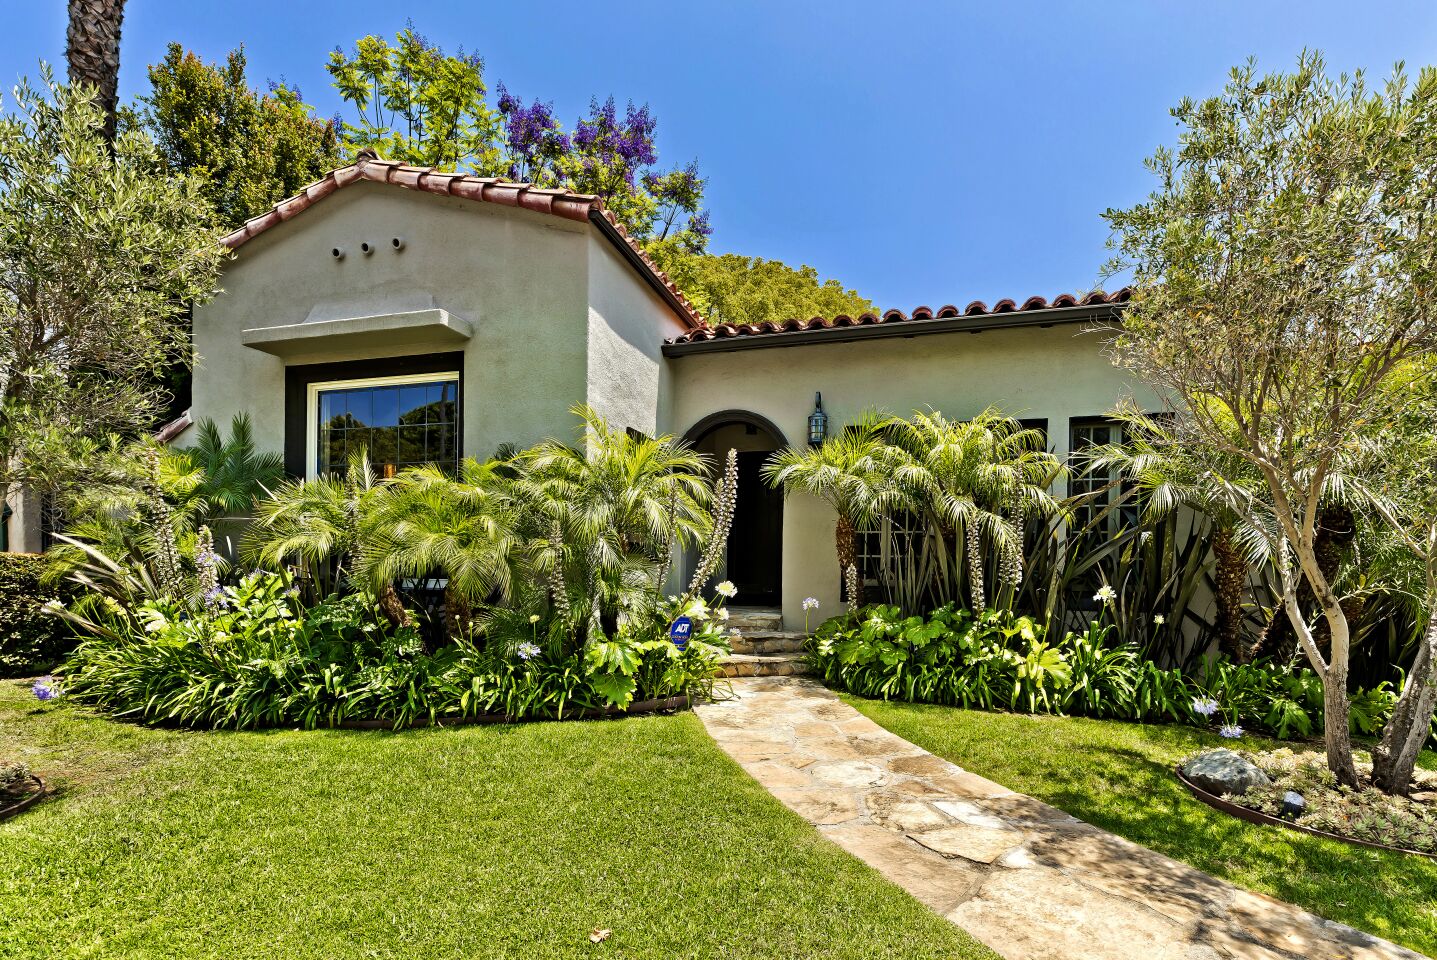 Exterior of a Spanish Colonial Revival style home with small palm trees, lawn and stone walkway